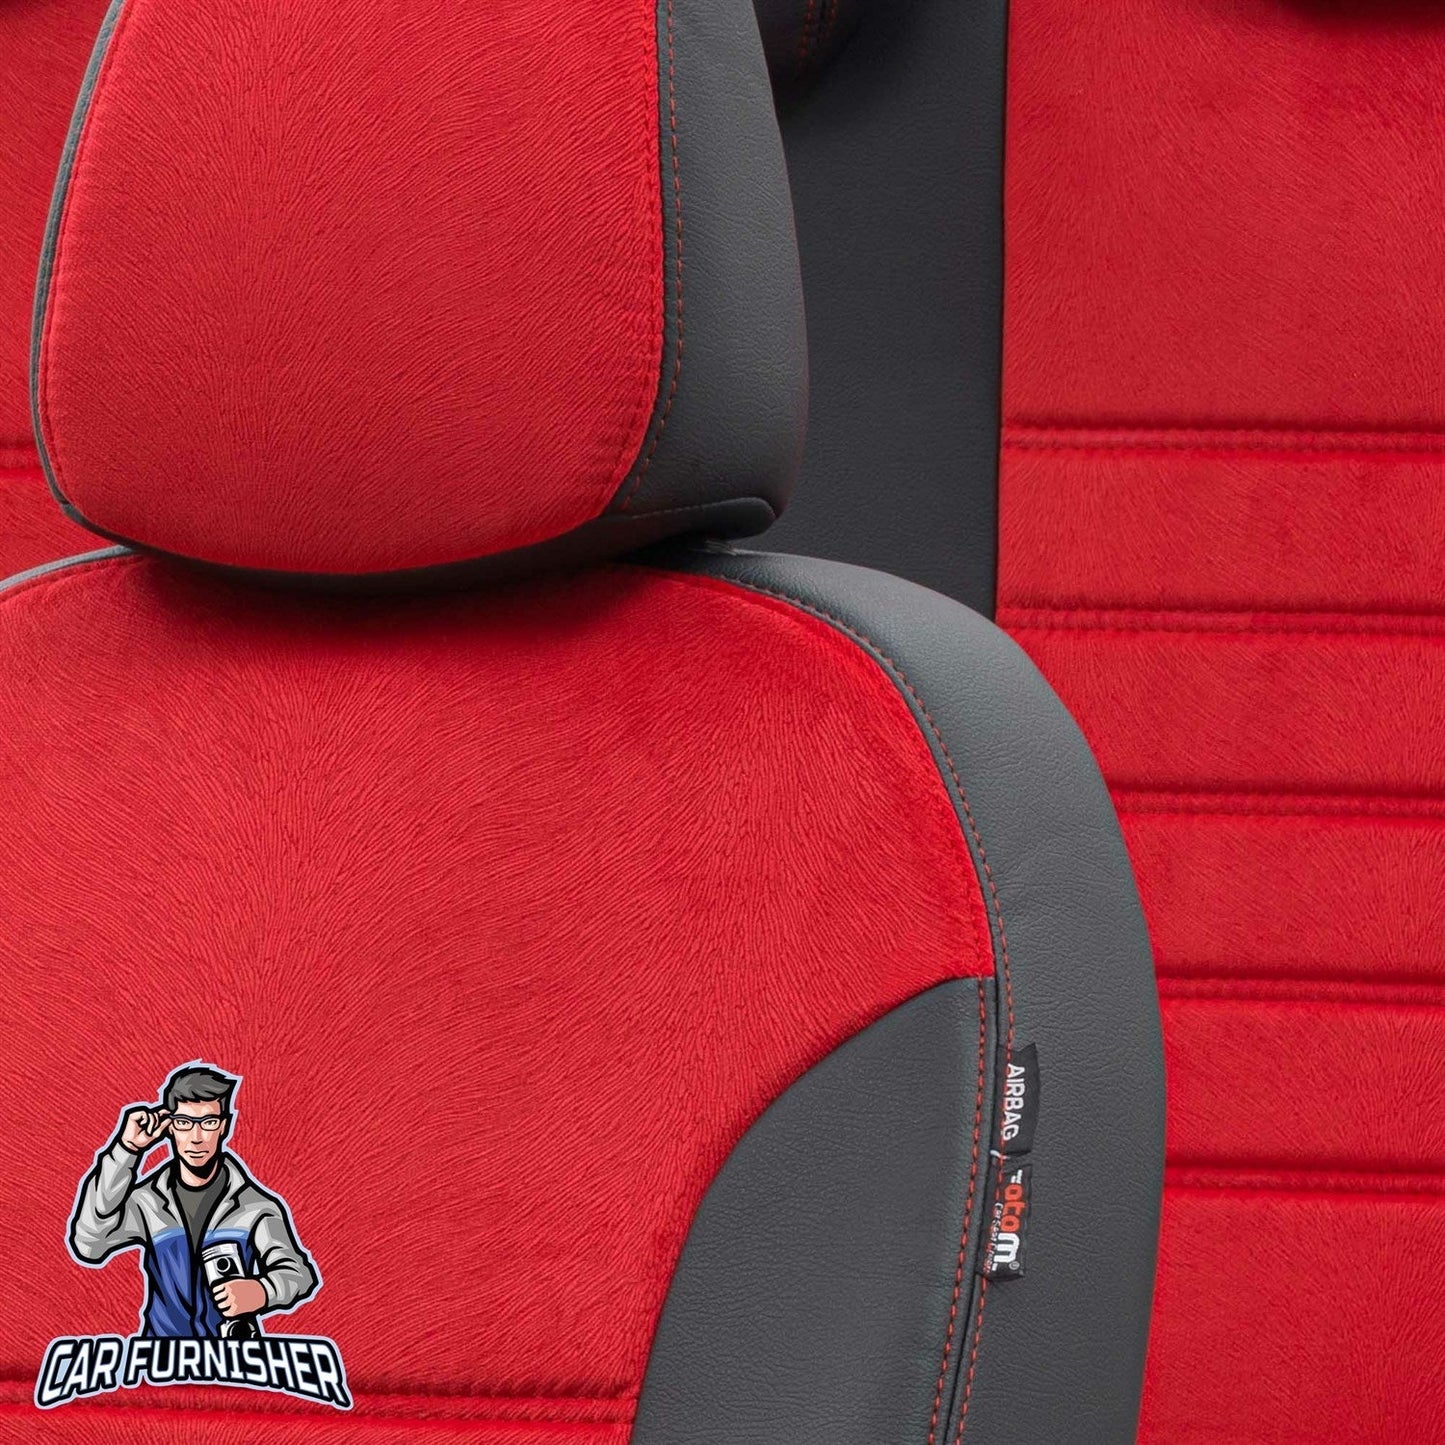 Nissan Pathfinder Seat Cover London Foal Feather Design Red Leather & Foal Feather